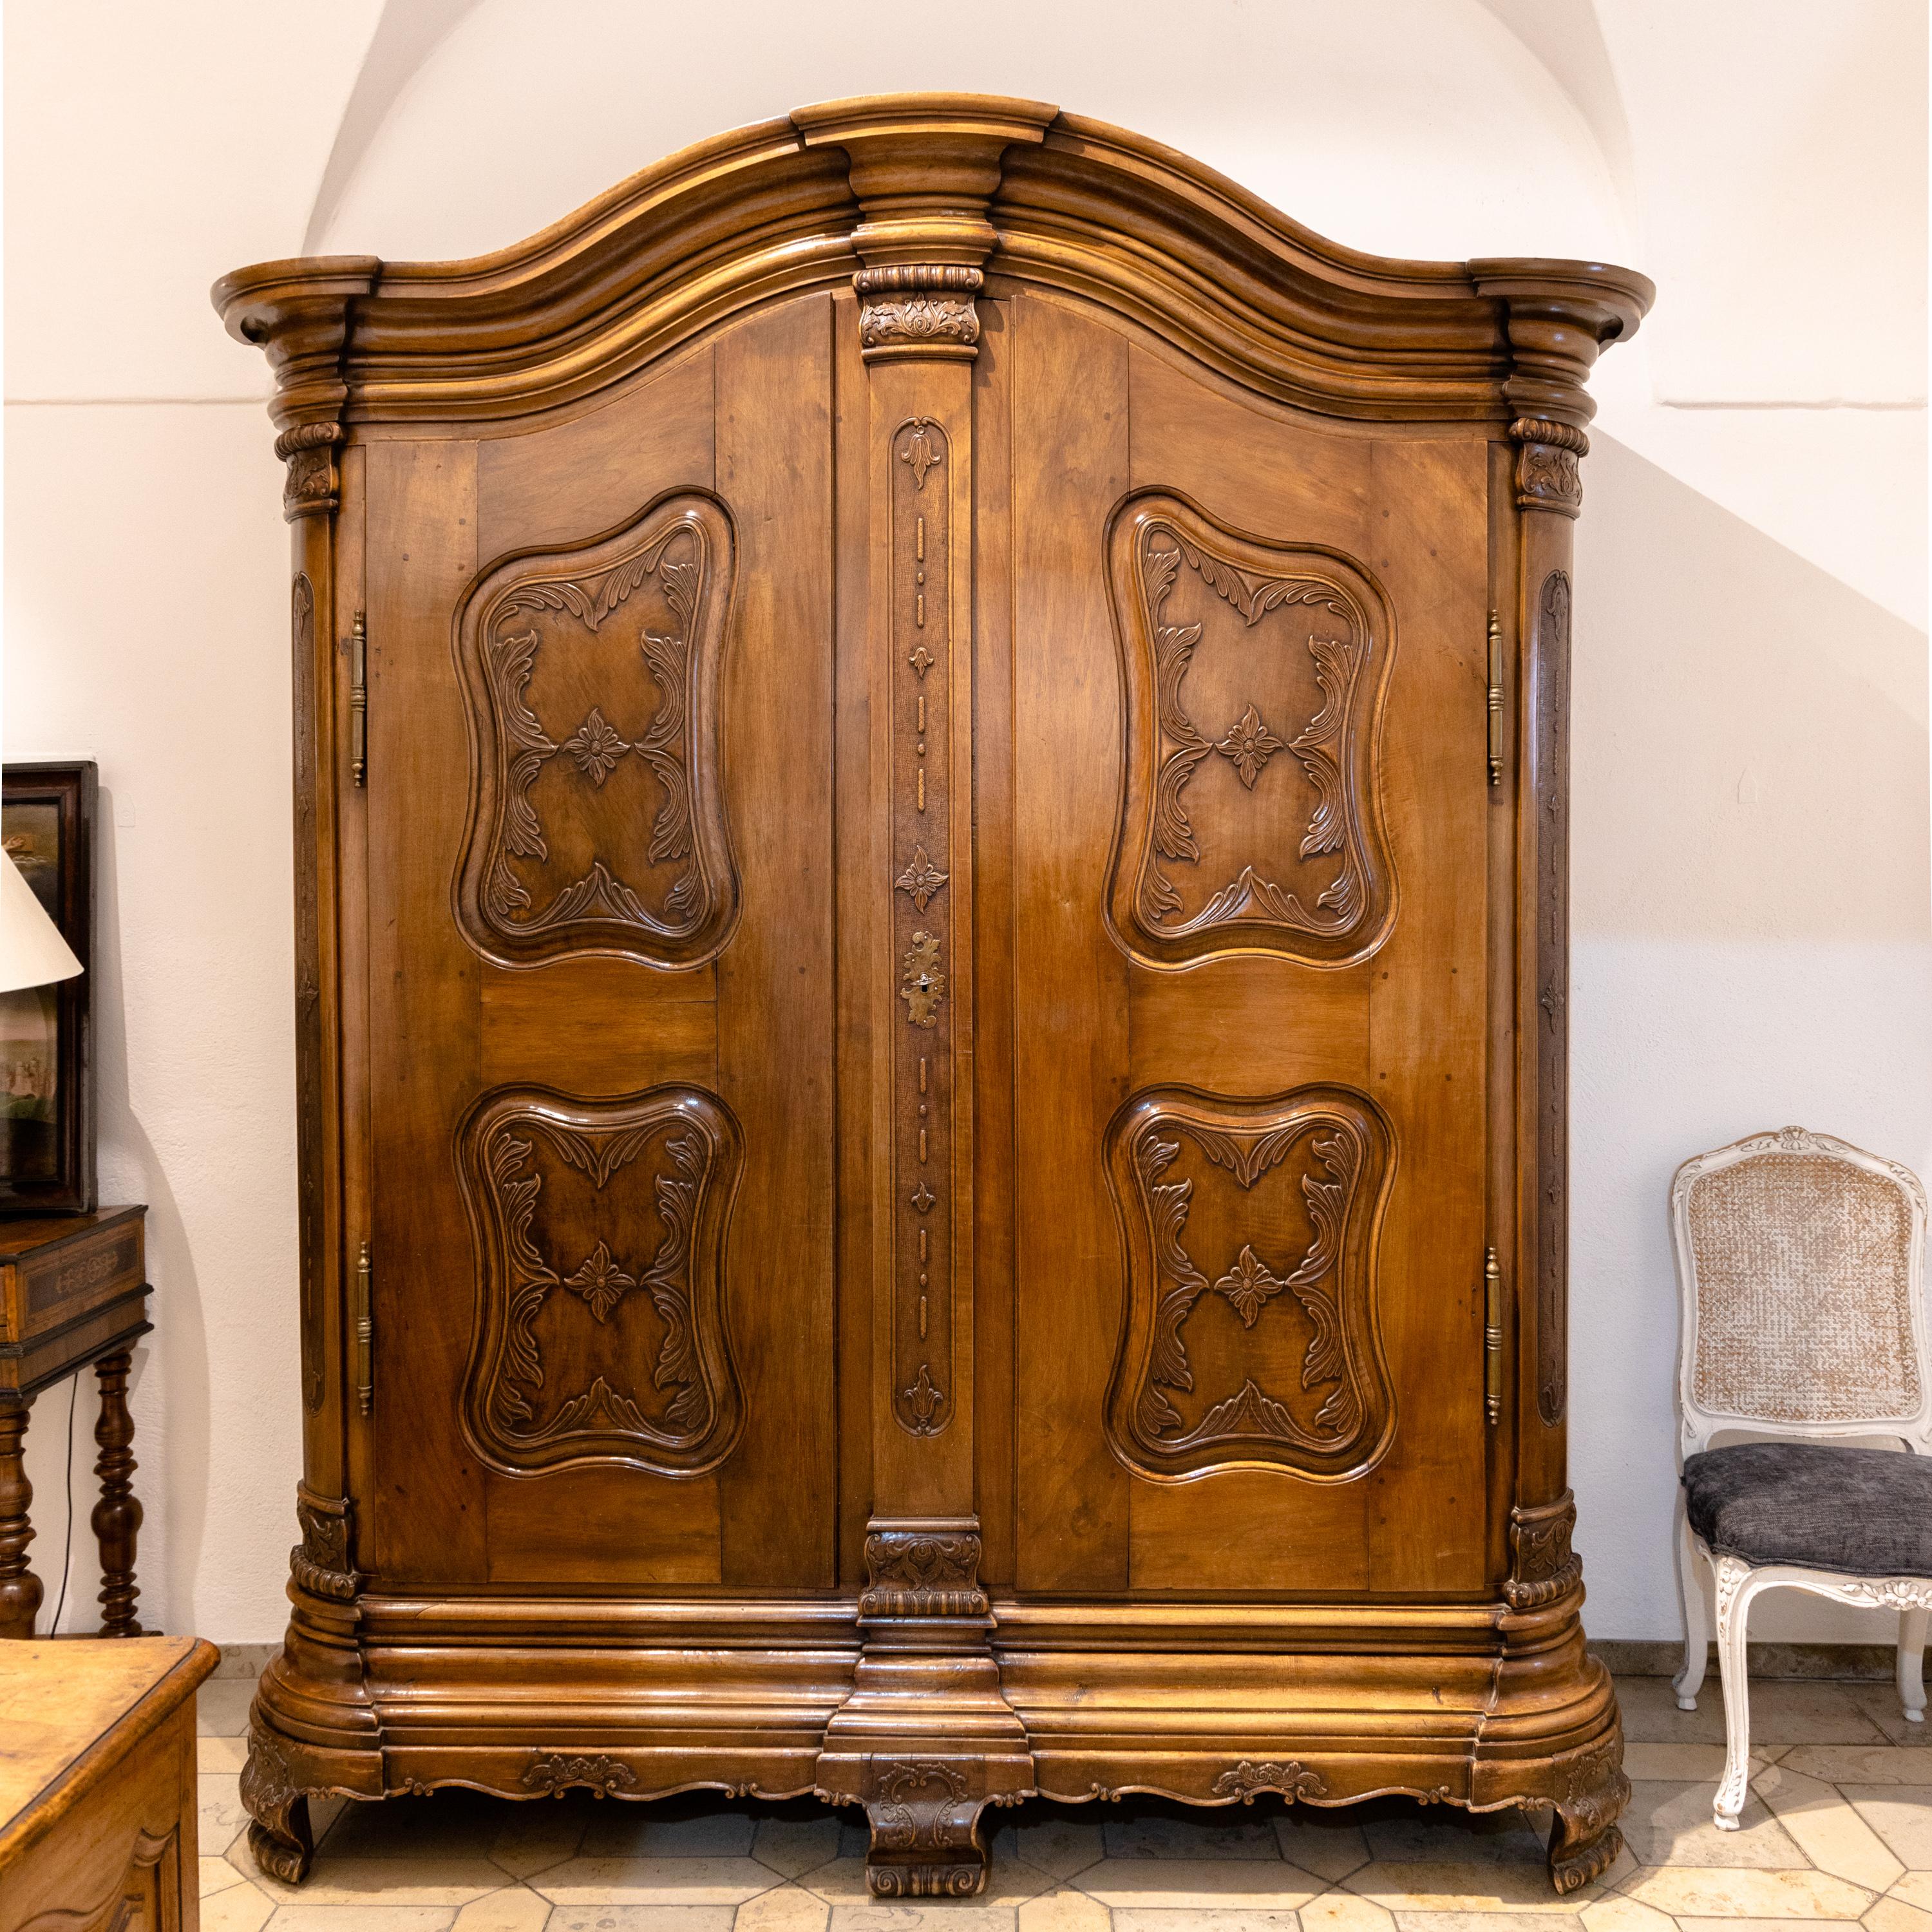 Large Baroque cabinet with a curved, multi-profiled cornice with cranked, rounded corners and two doors. Four softly shaped panels with vine decorations in relief divide the doors, as well as two asymmetrical panels on each side. The rounded